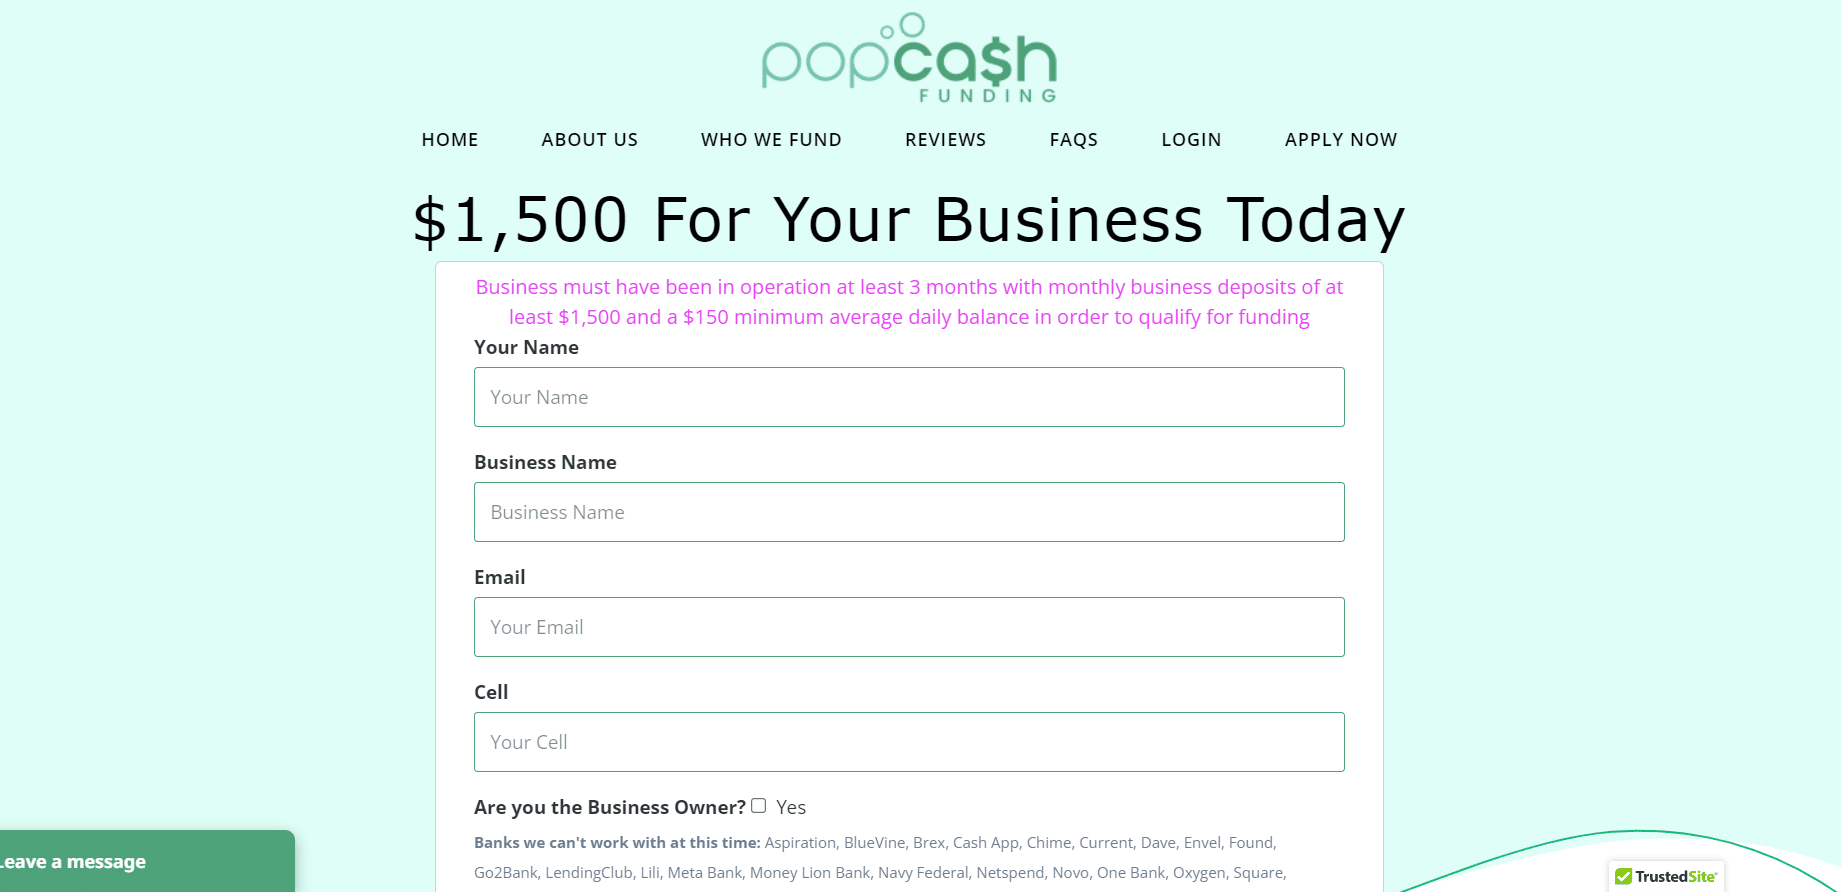 what is popcash funding